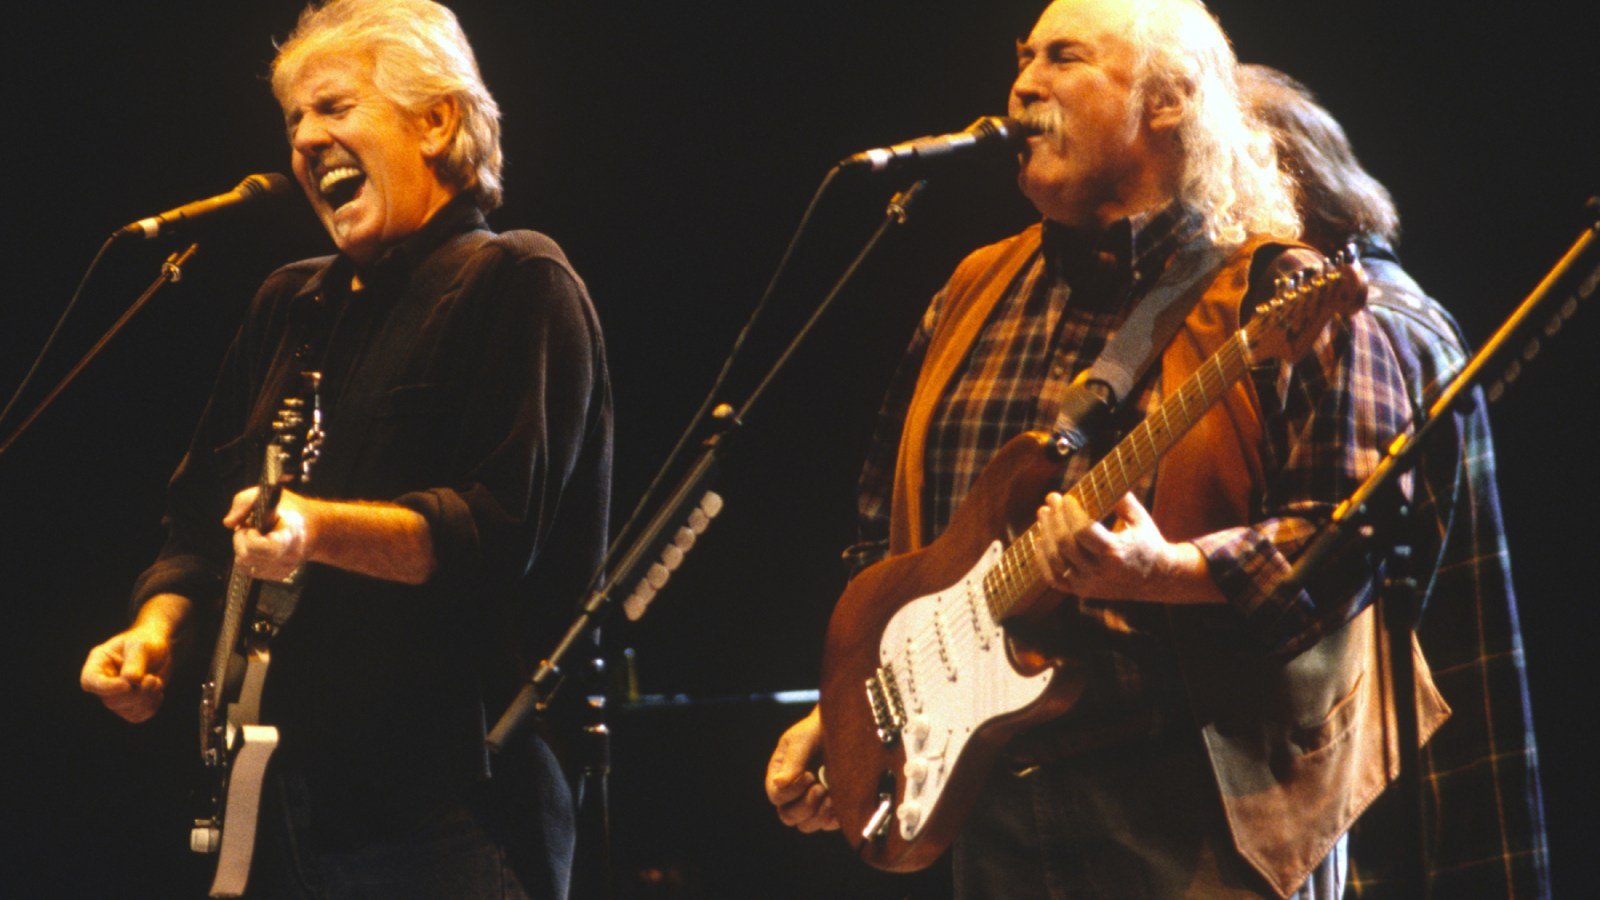 Graham Nash Remembers David Crosby and the 'Pure Joy of the Music' They Created